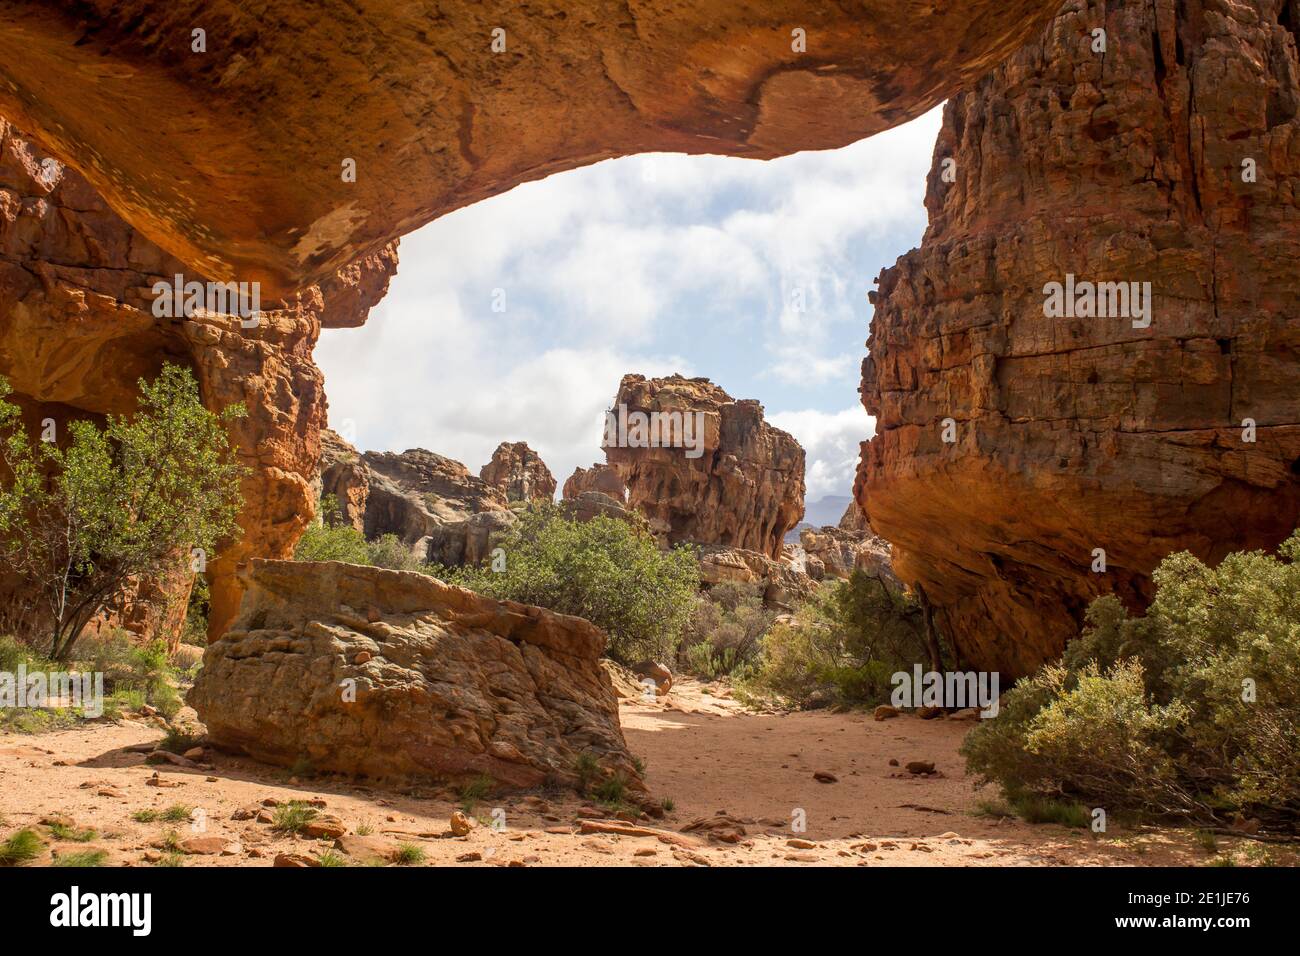 Looking through the strange,  rock formations, forming a natural doorway, at the Stadsaal Caves in the Cederberg Mountains of South Africa Stock Photo